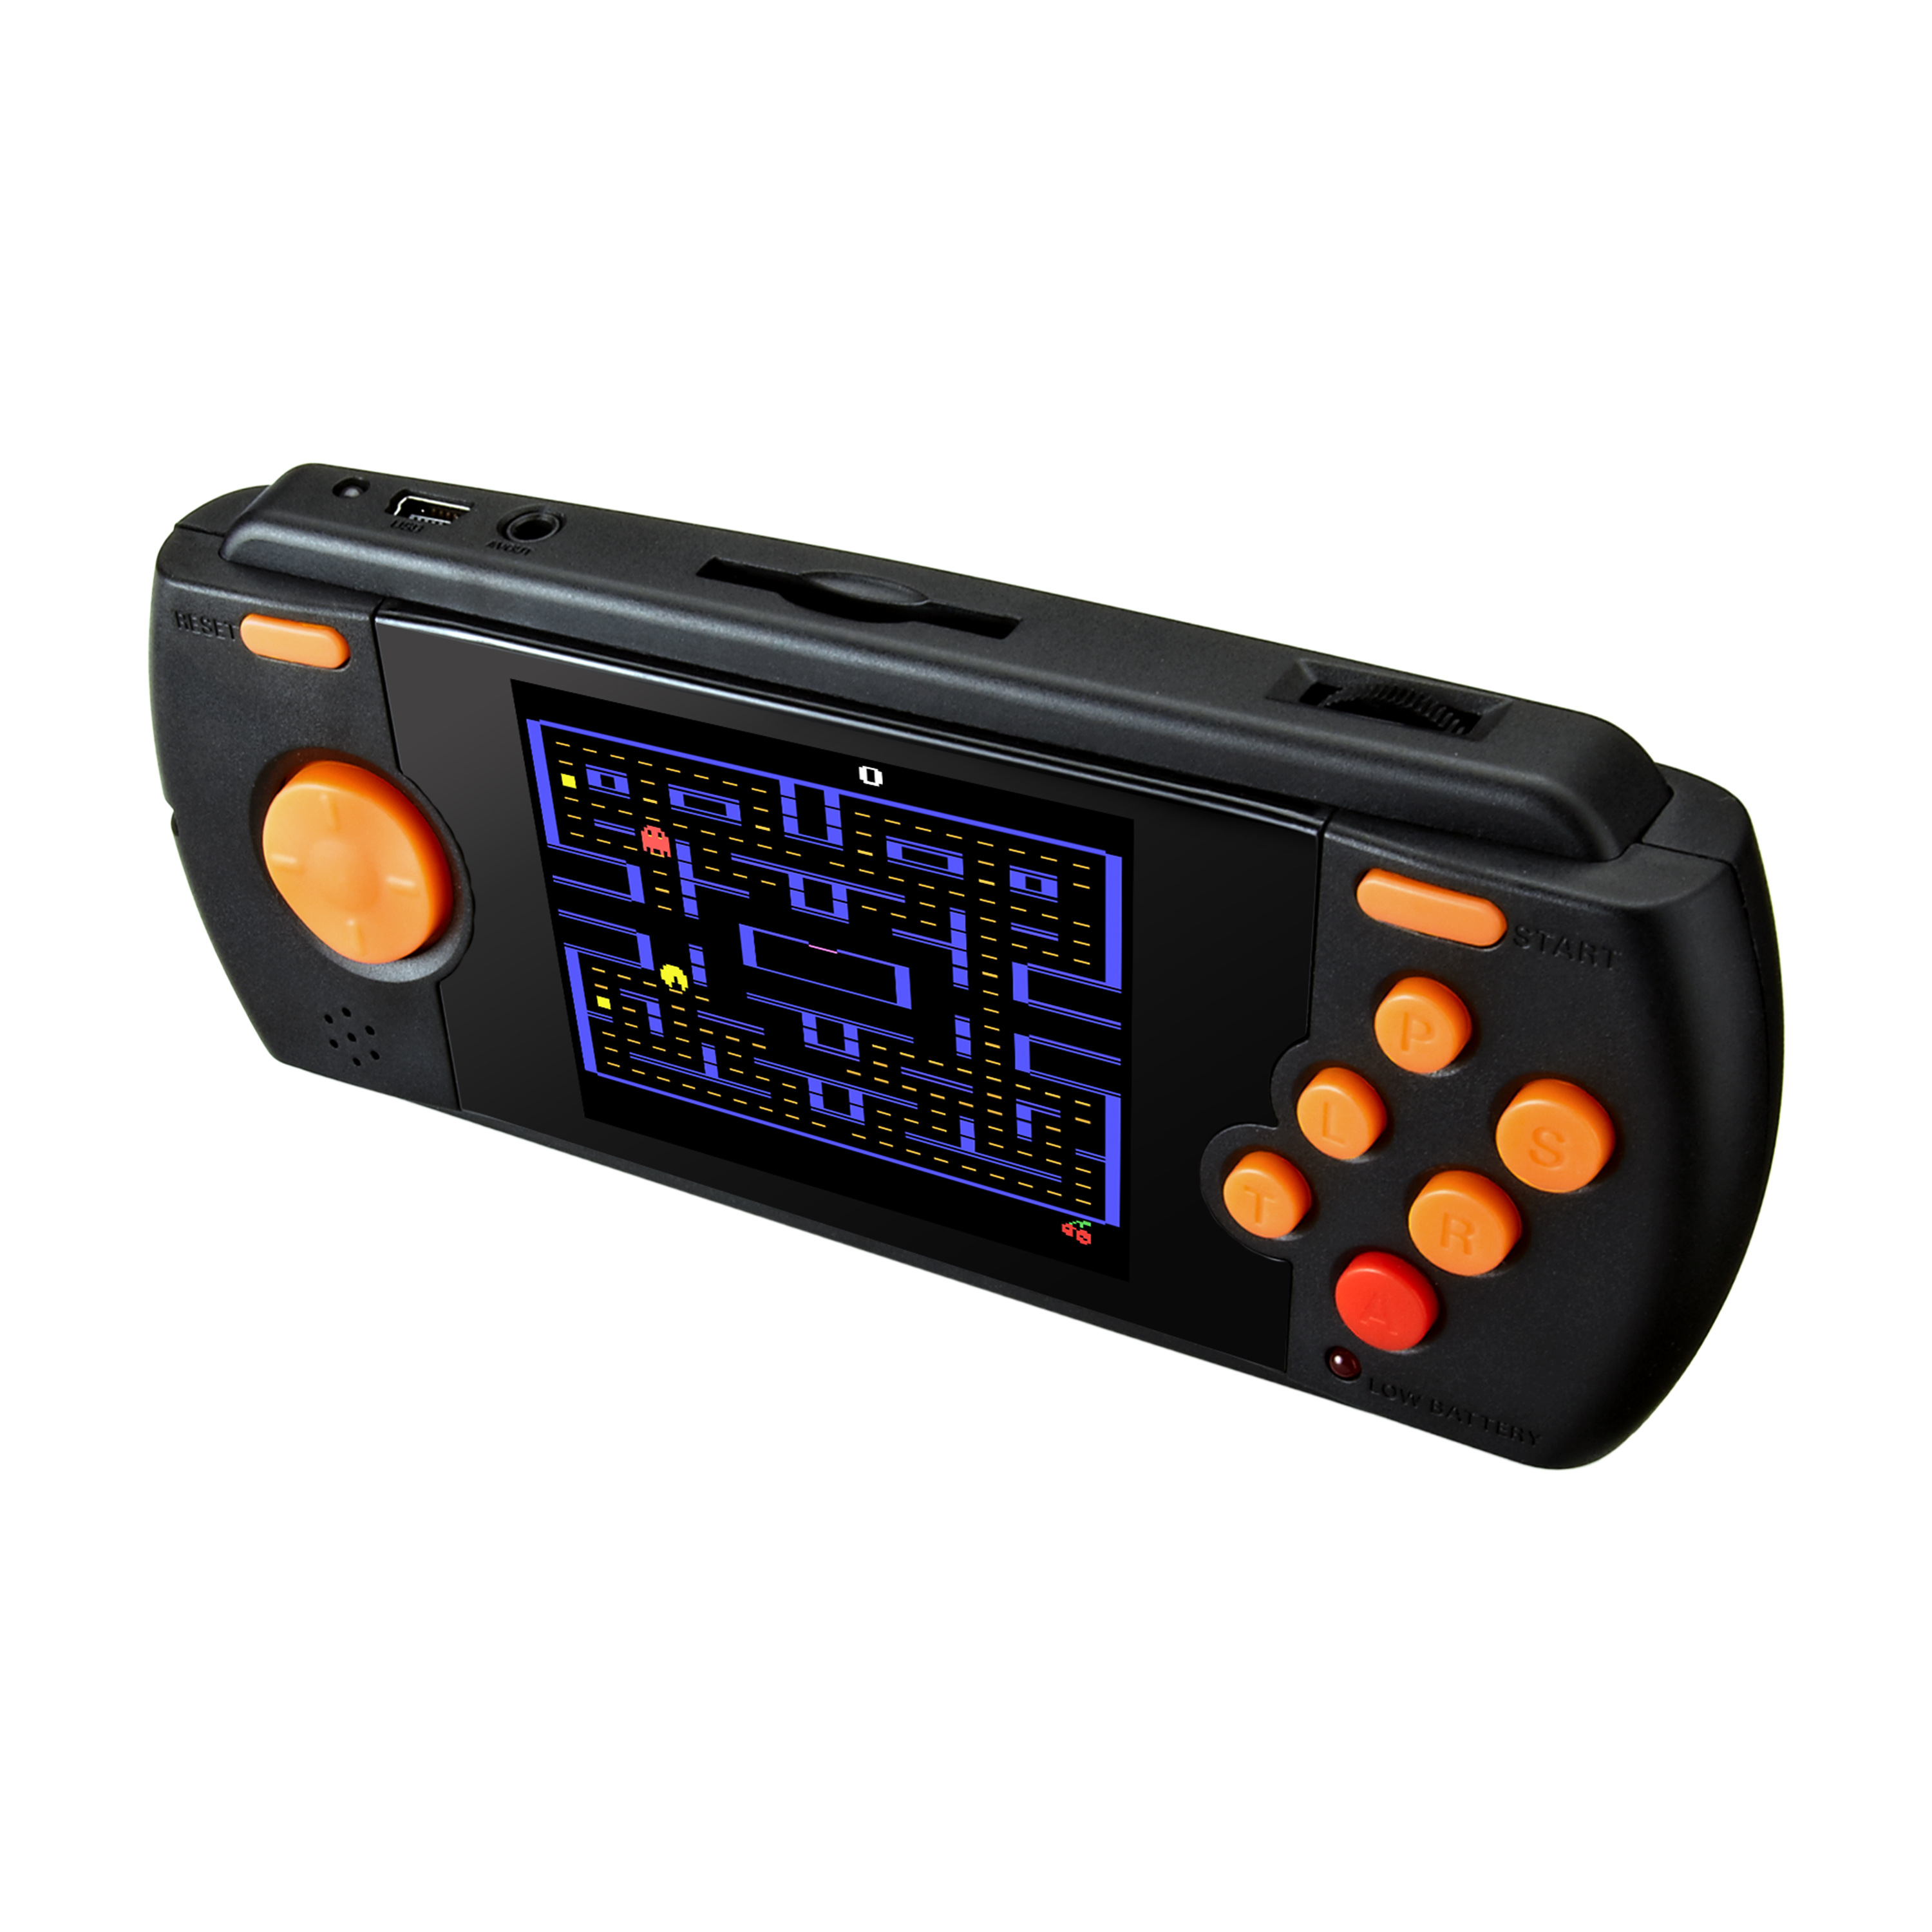 Atari Flashback Portable Game Player - Hand Held Game Console - image 2 of 4